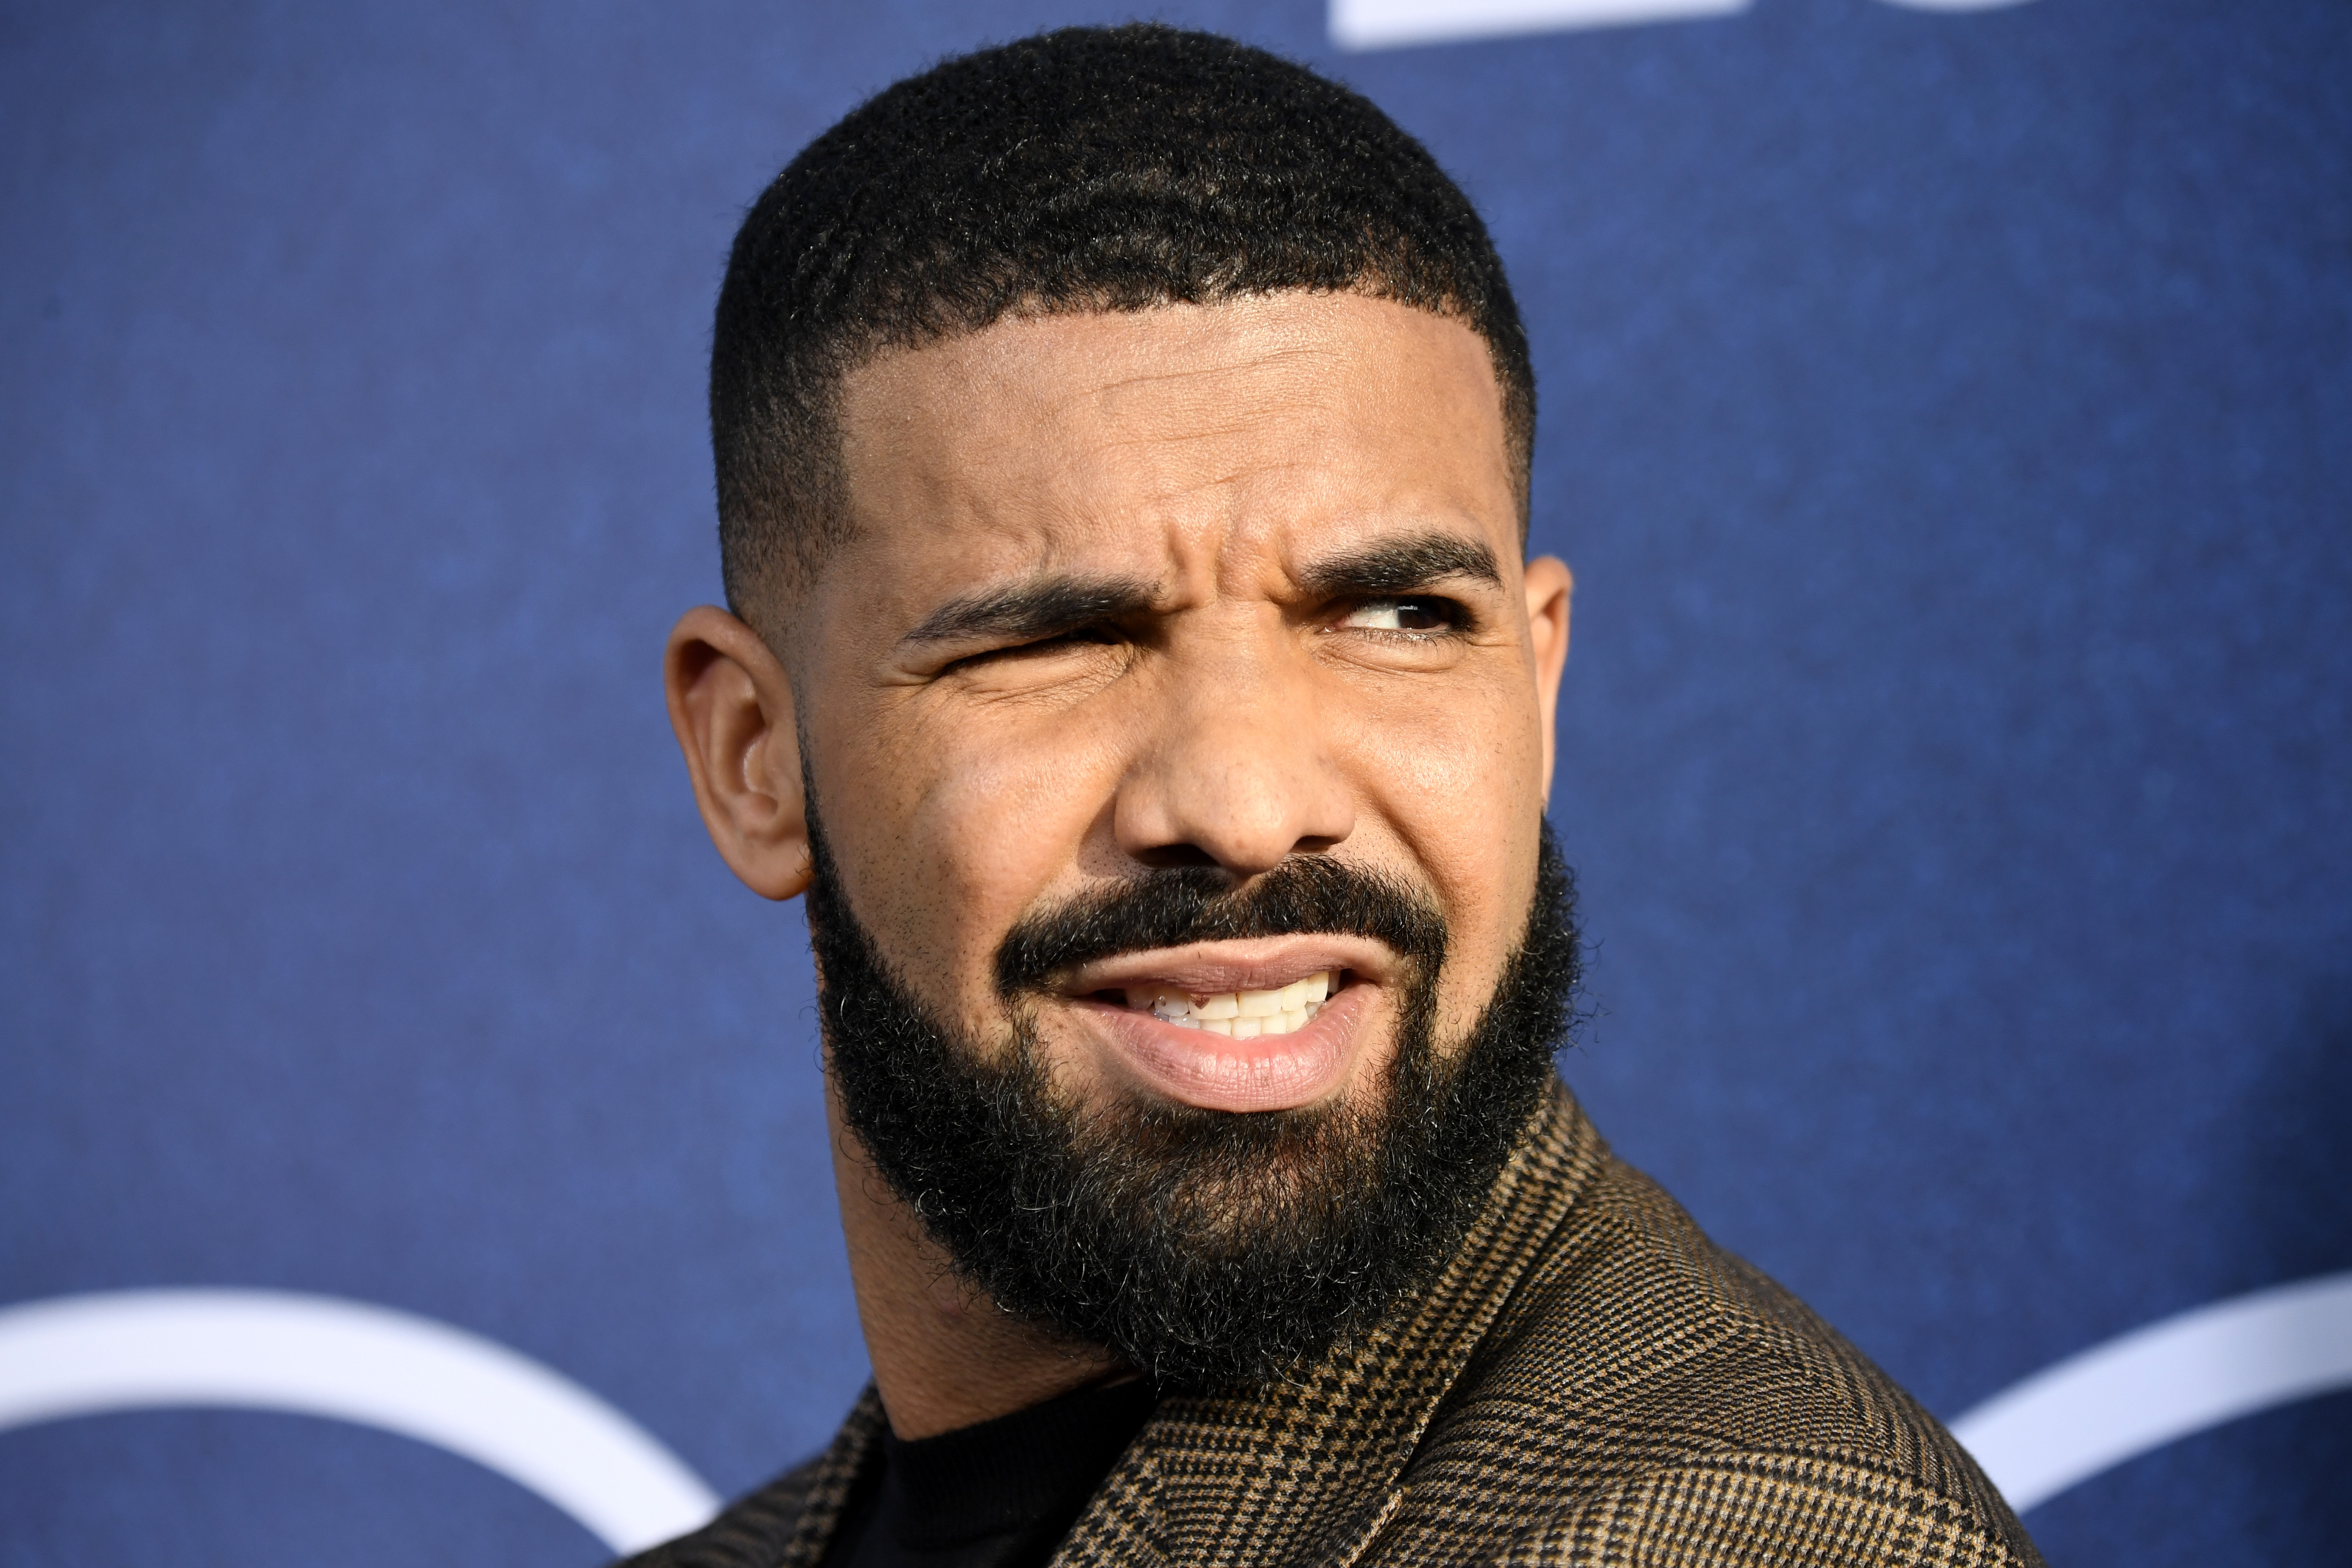 Update: Drake Announces New LP, Debut Poetry Book With Songwriter Kenza Samir